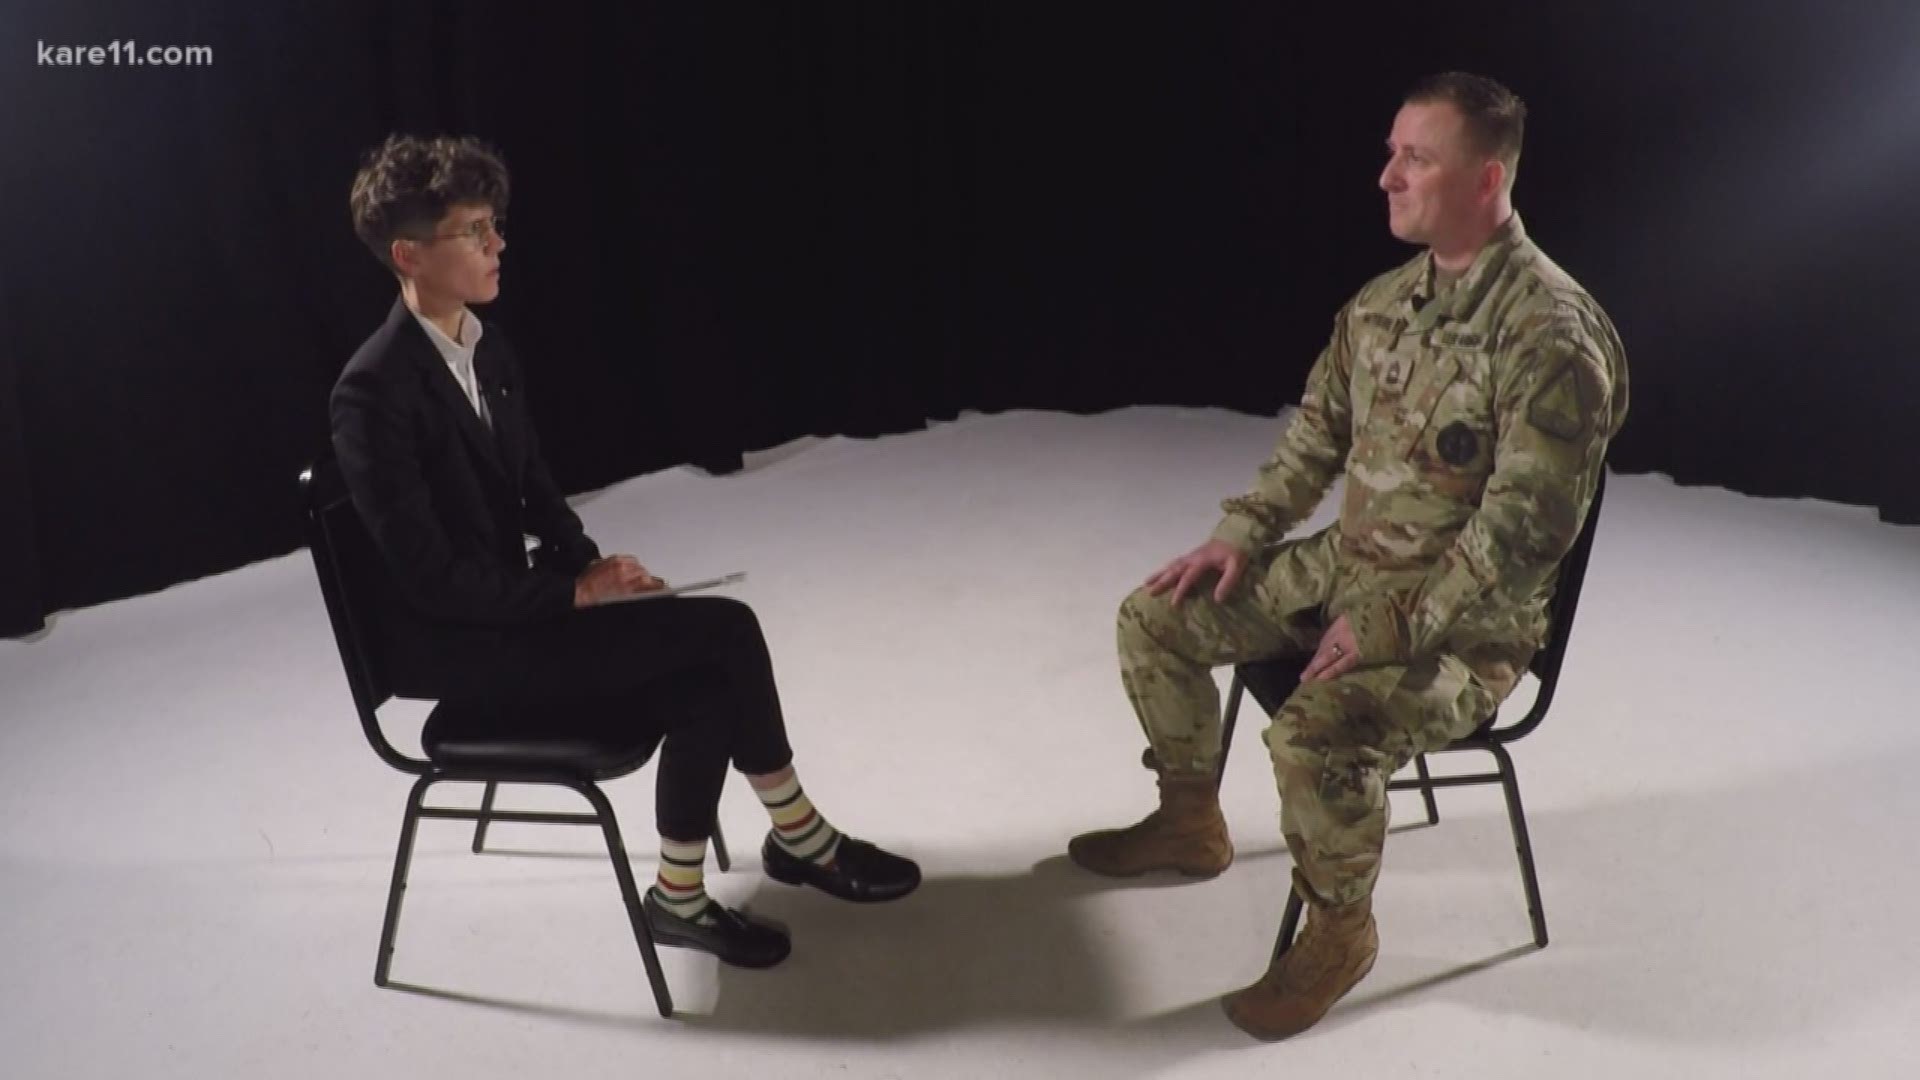 Jana Shortal talked to Minnesota Army National Guard members about recruiting after the Sept. 11 attacks and present day.